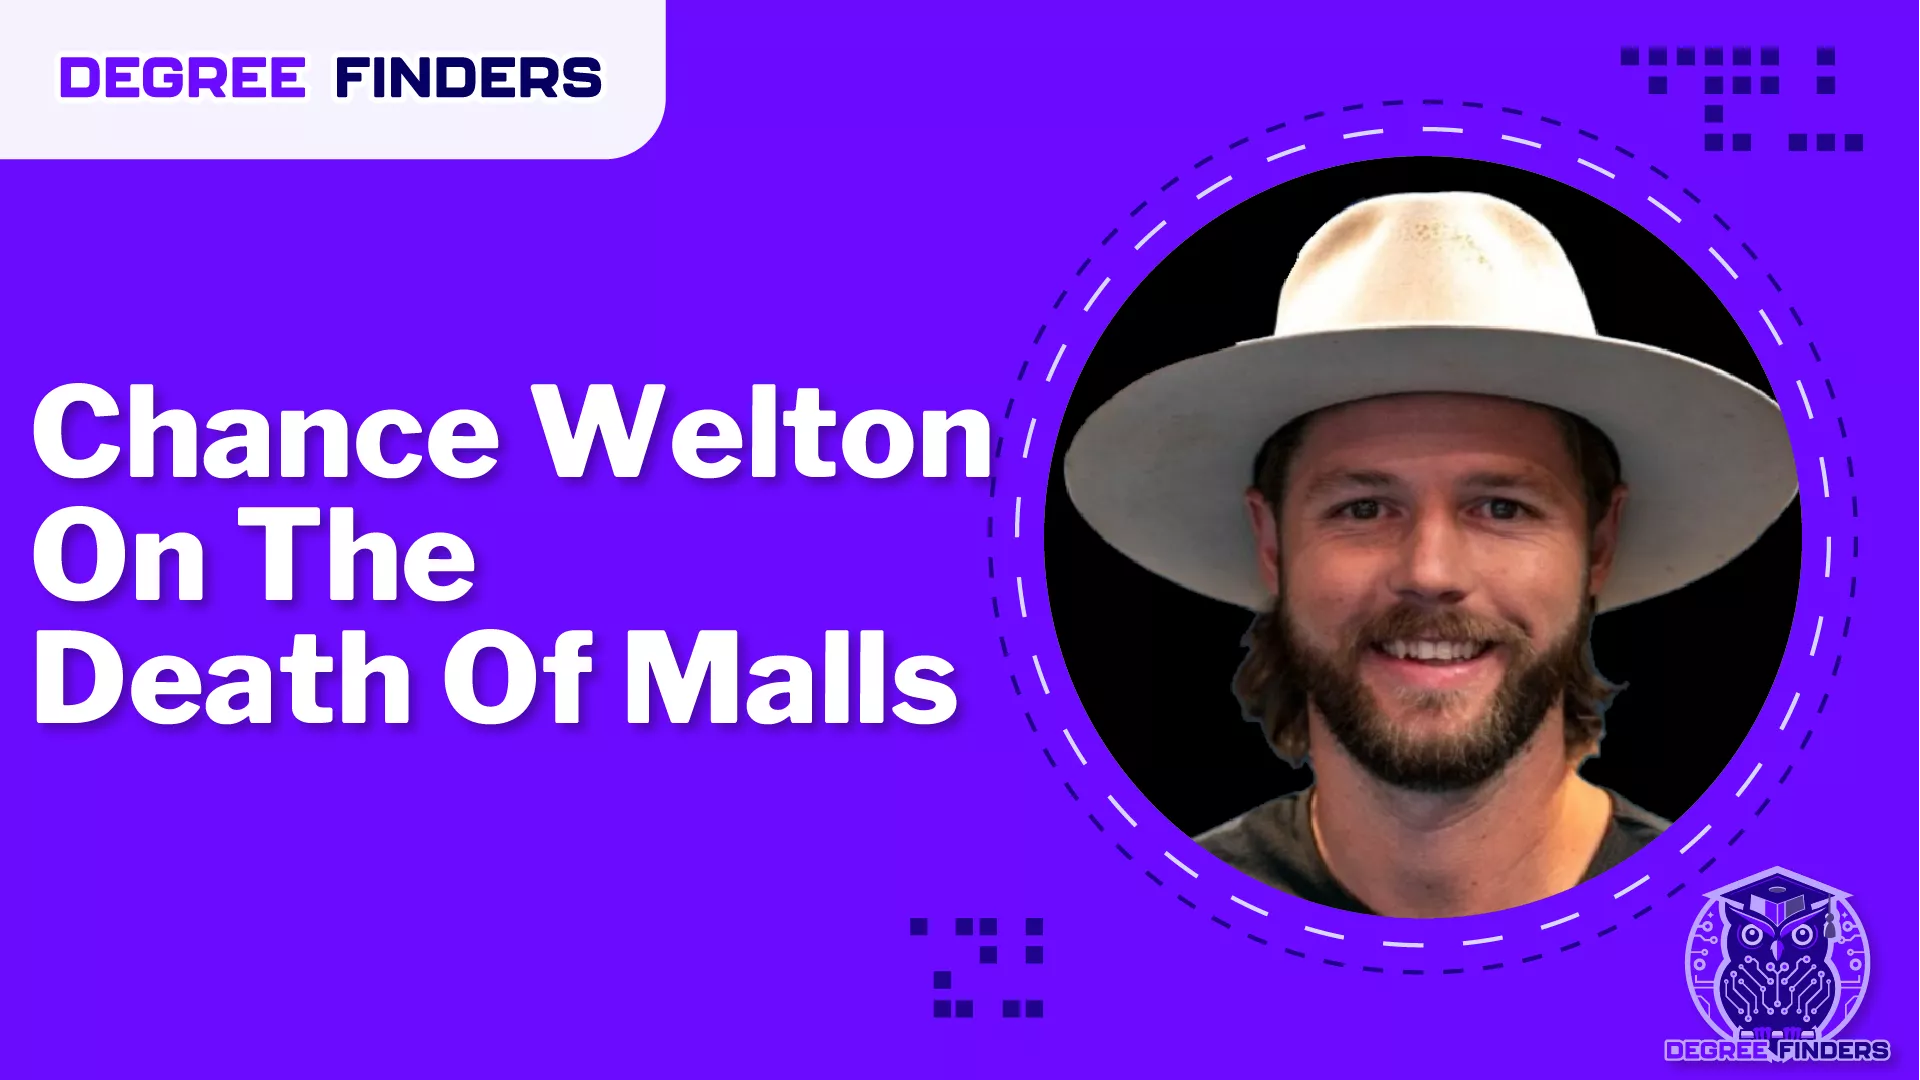 Chance Welton On The Death Of Malls